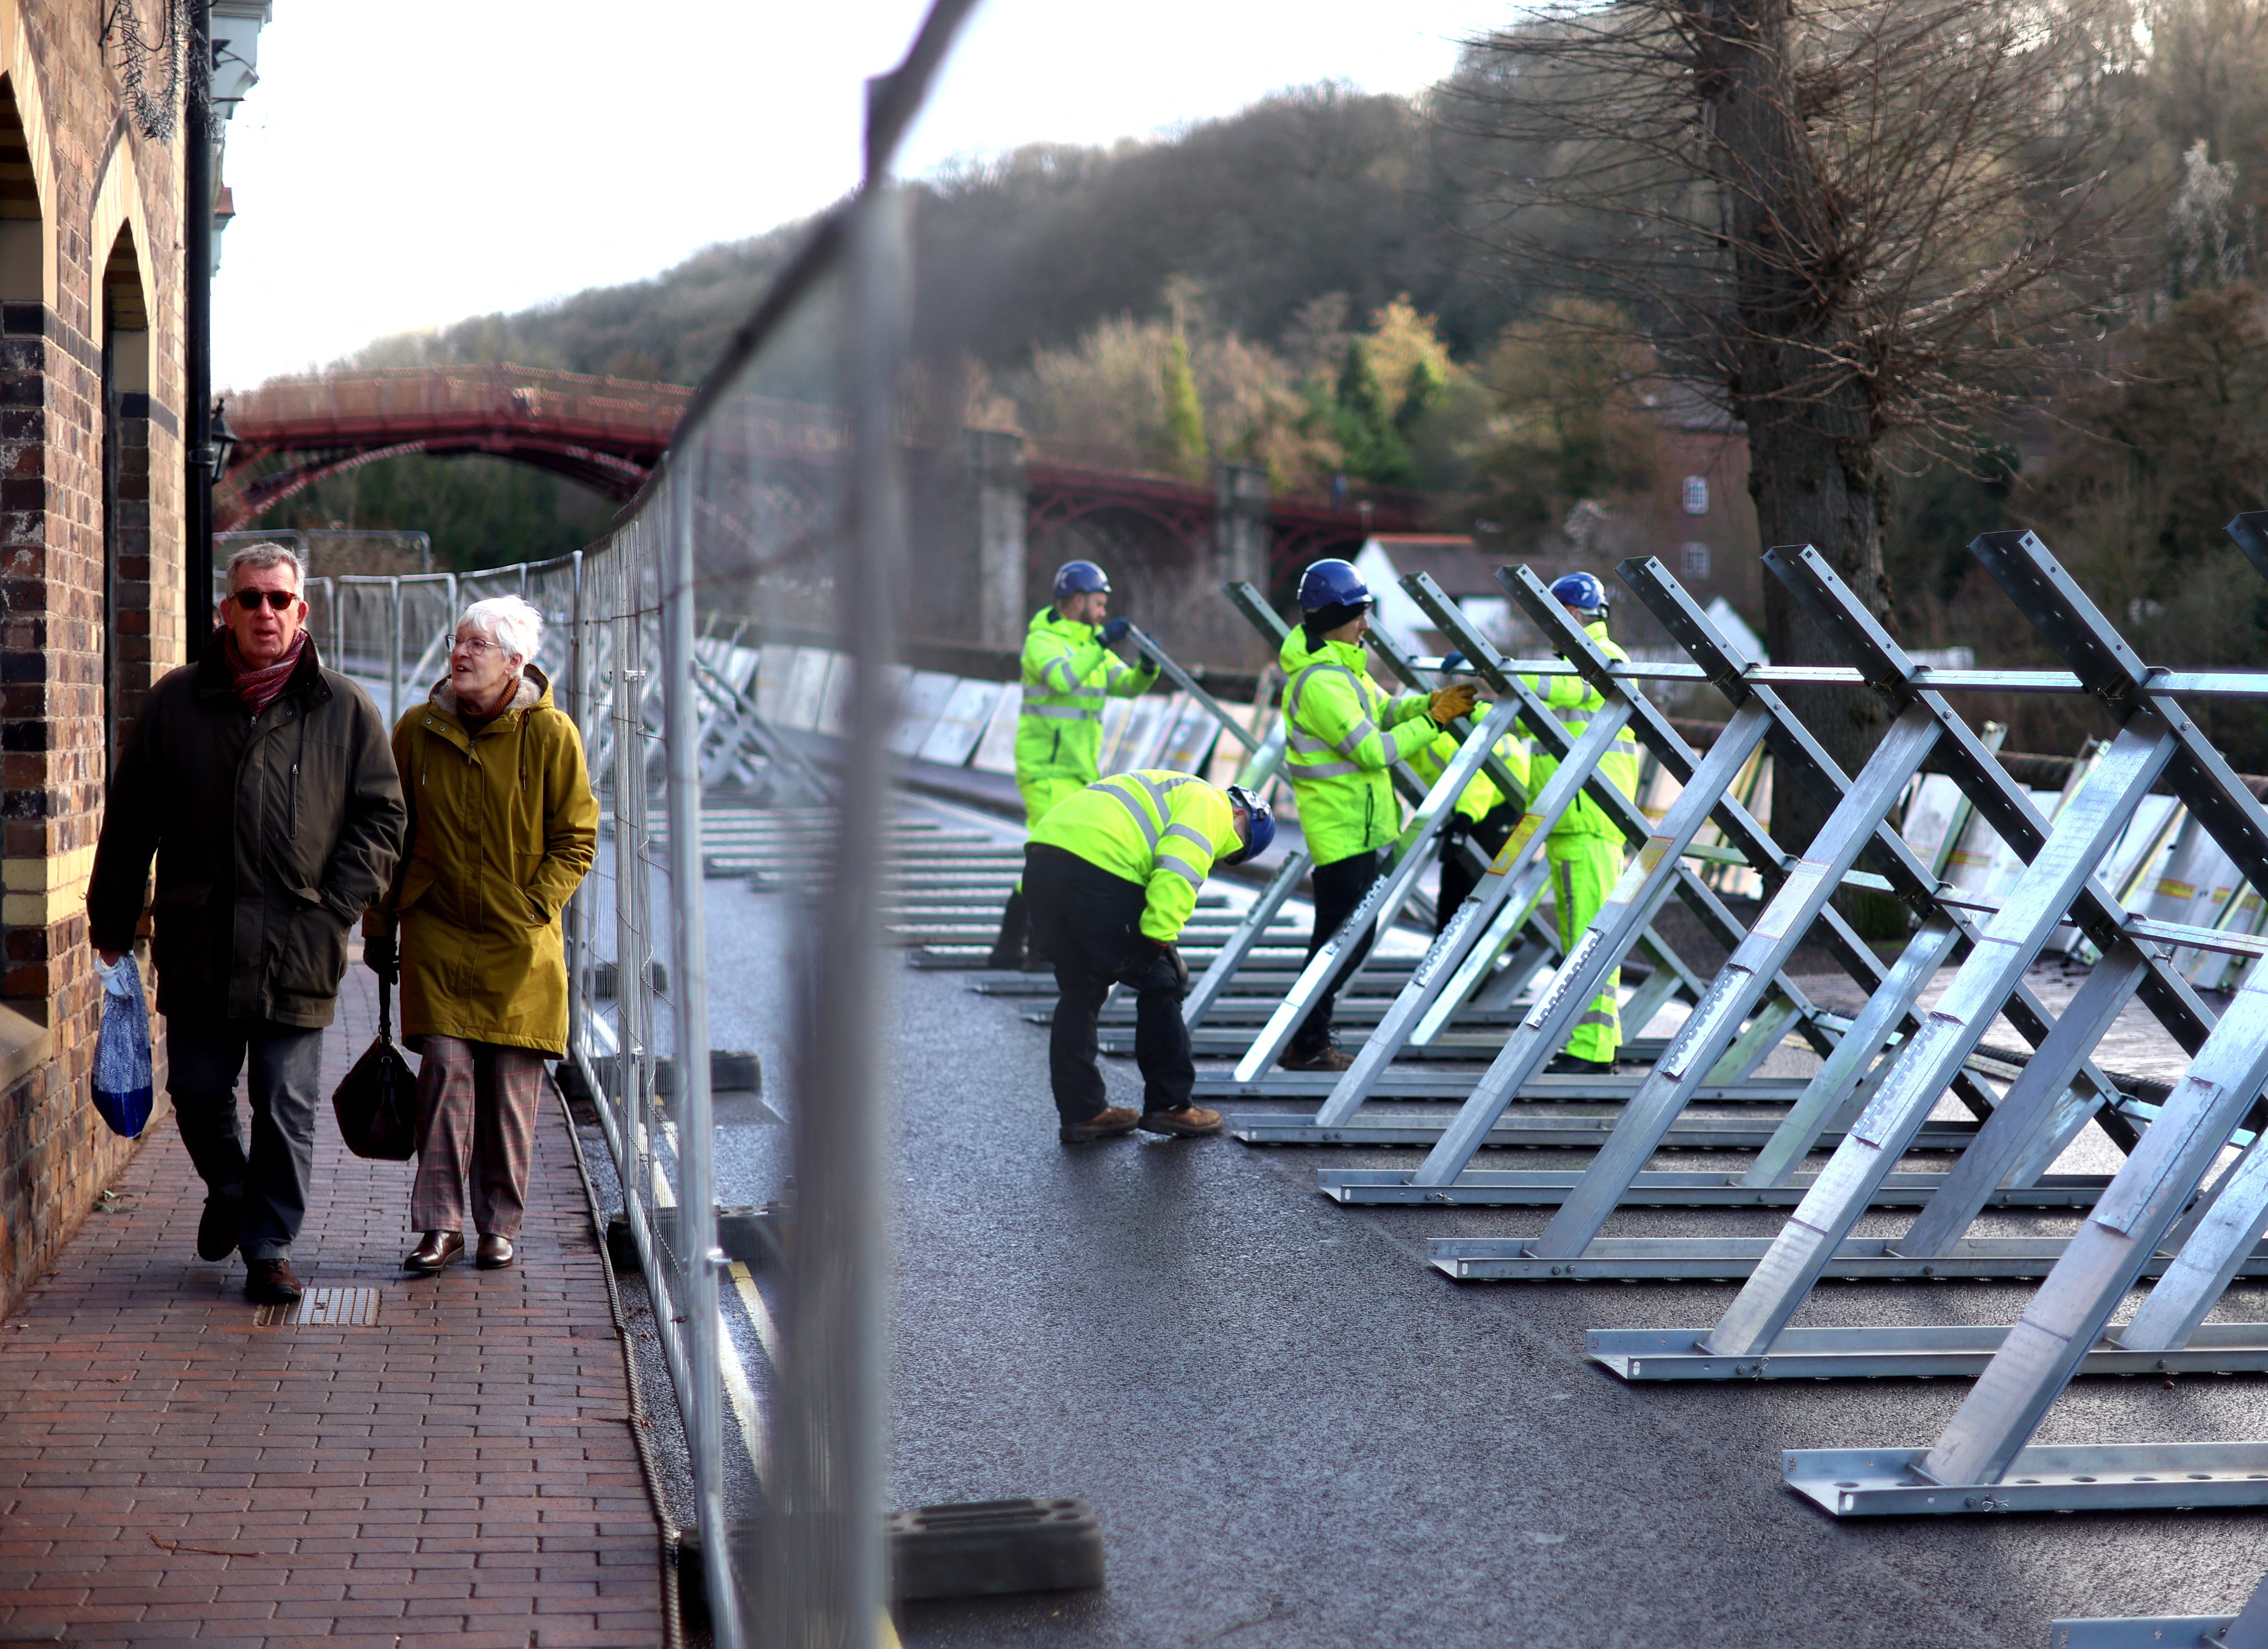 Environment Agency workers erect flood barriers earlier this week to protect property by the River Severn in Ironbridge, Shropshire